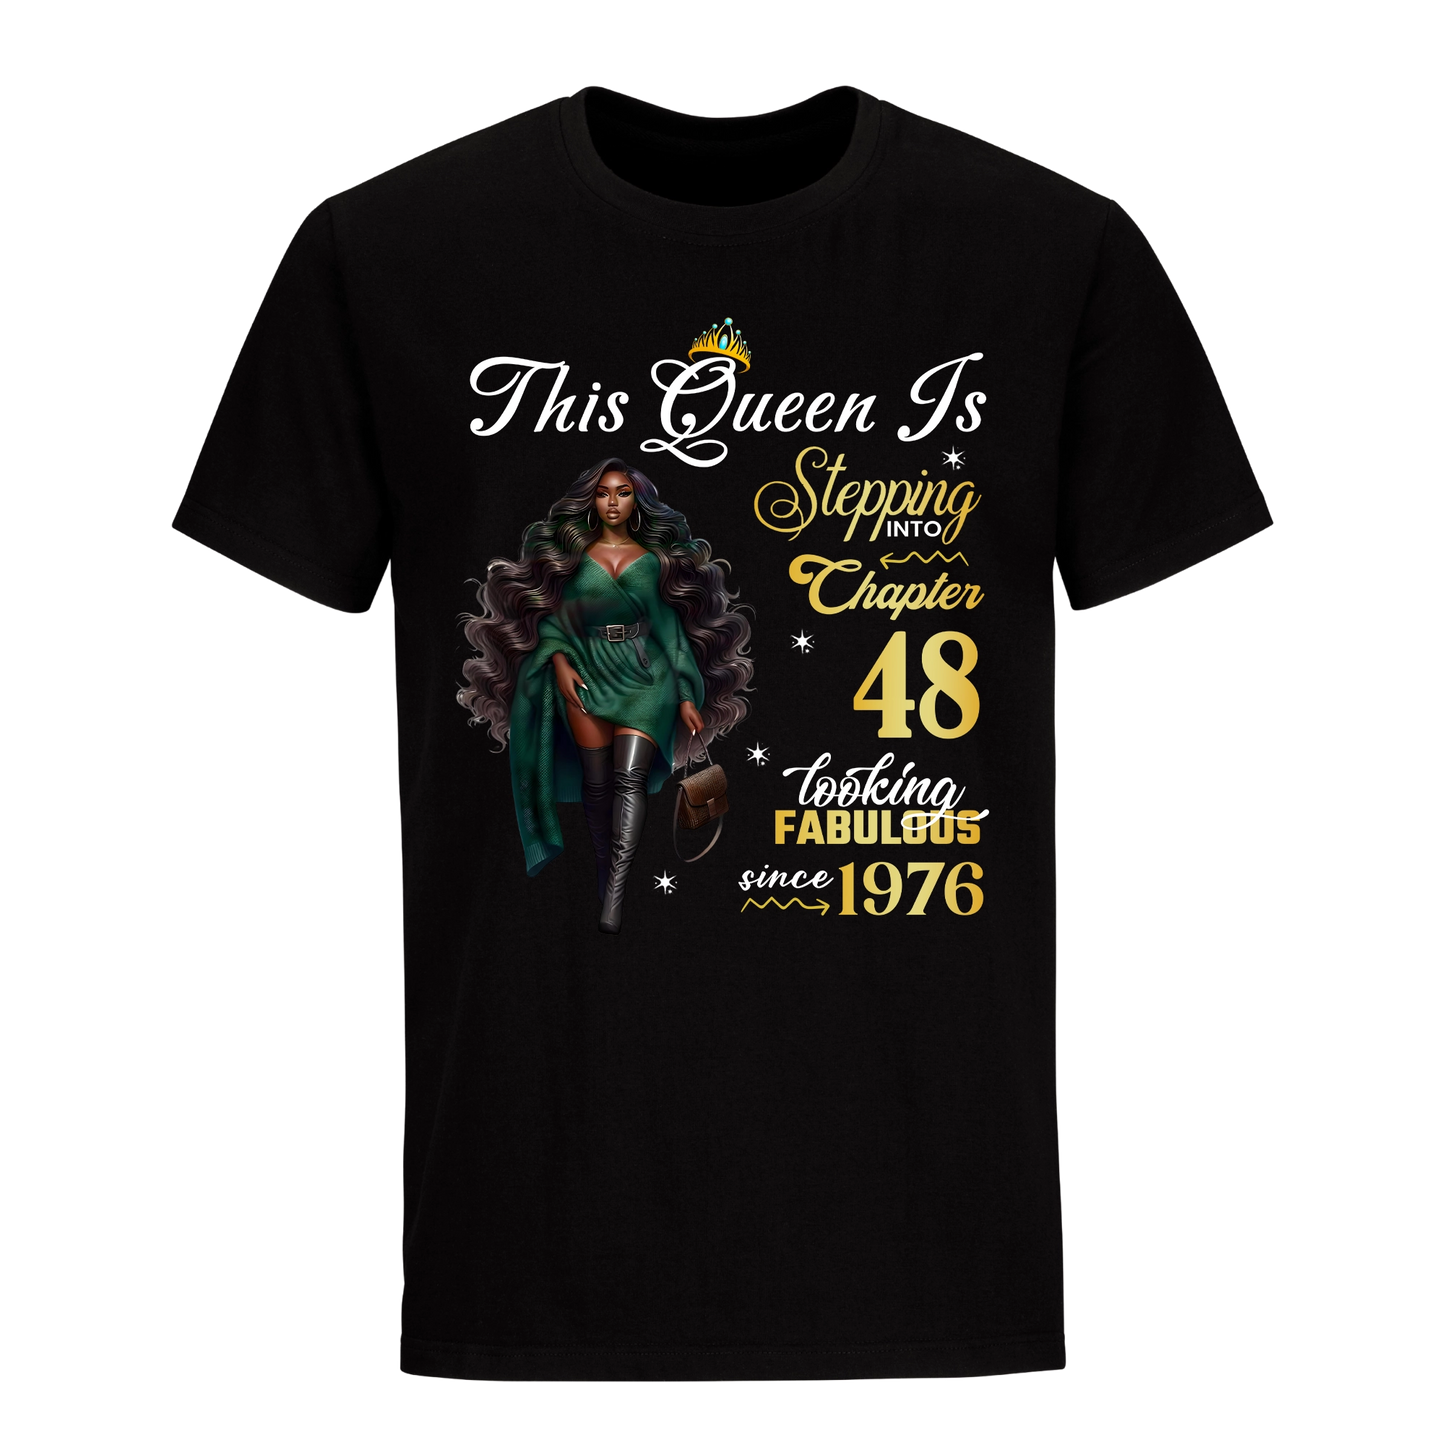 THIS QUEEN IS LOOKING FABULOUS 48 UNISEX SHIRT